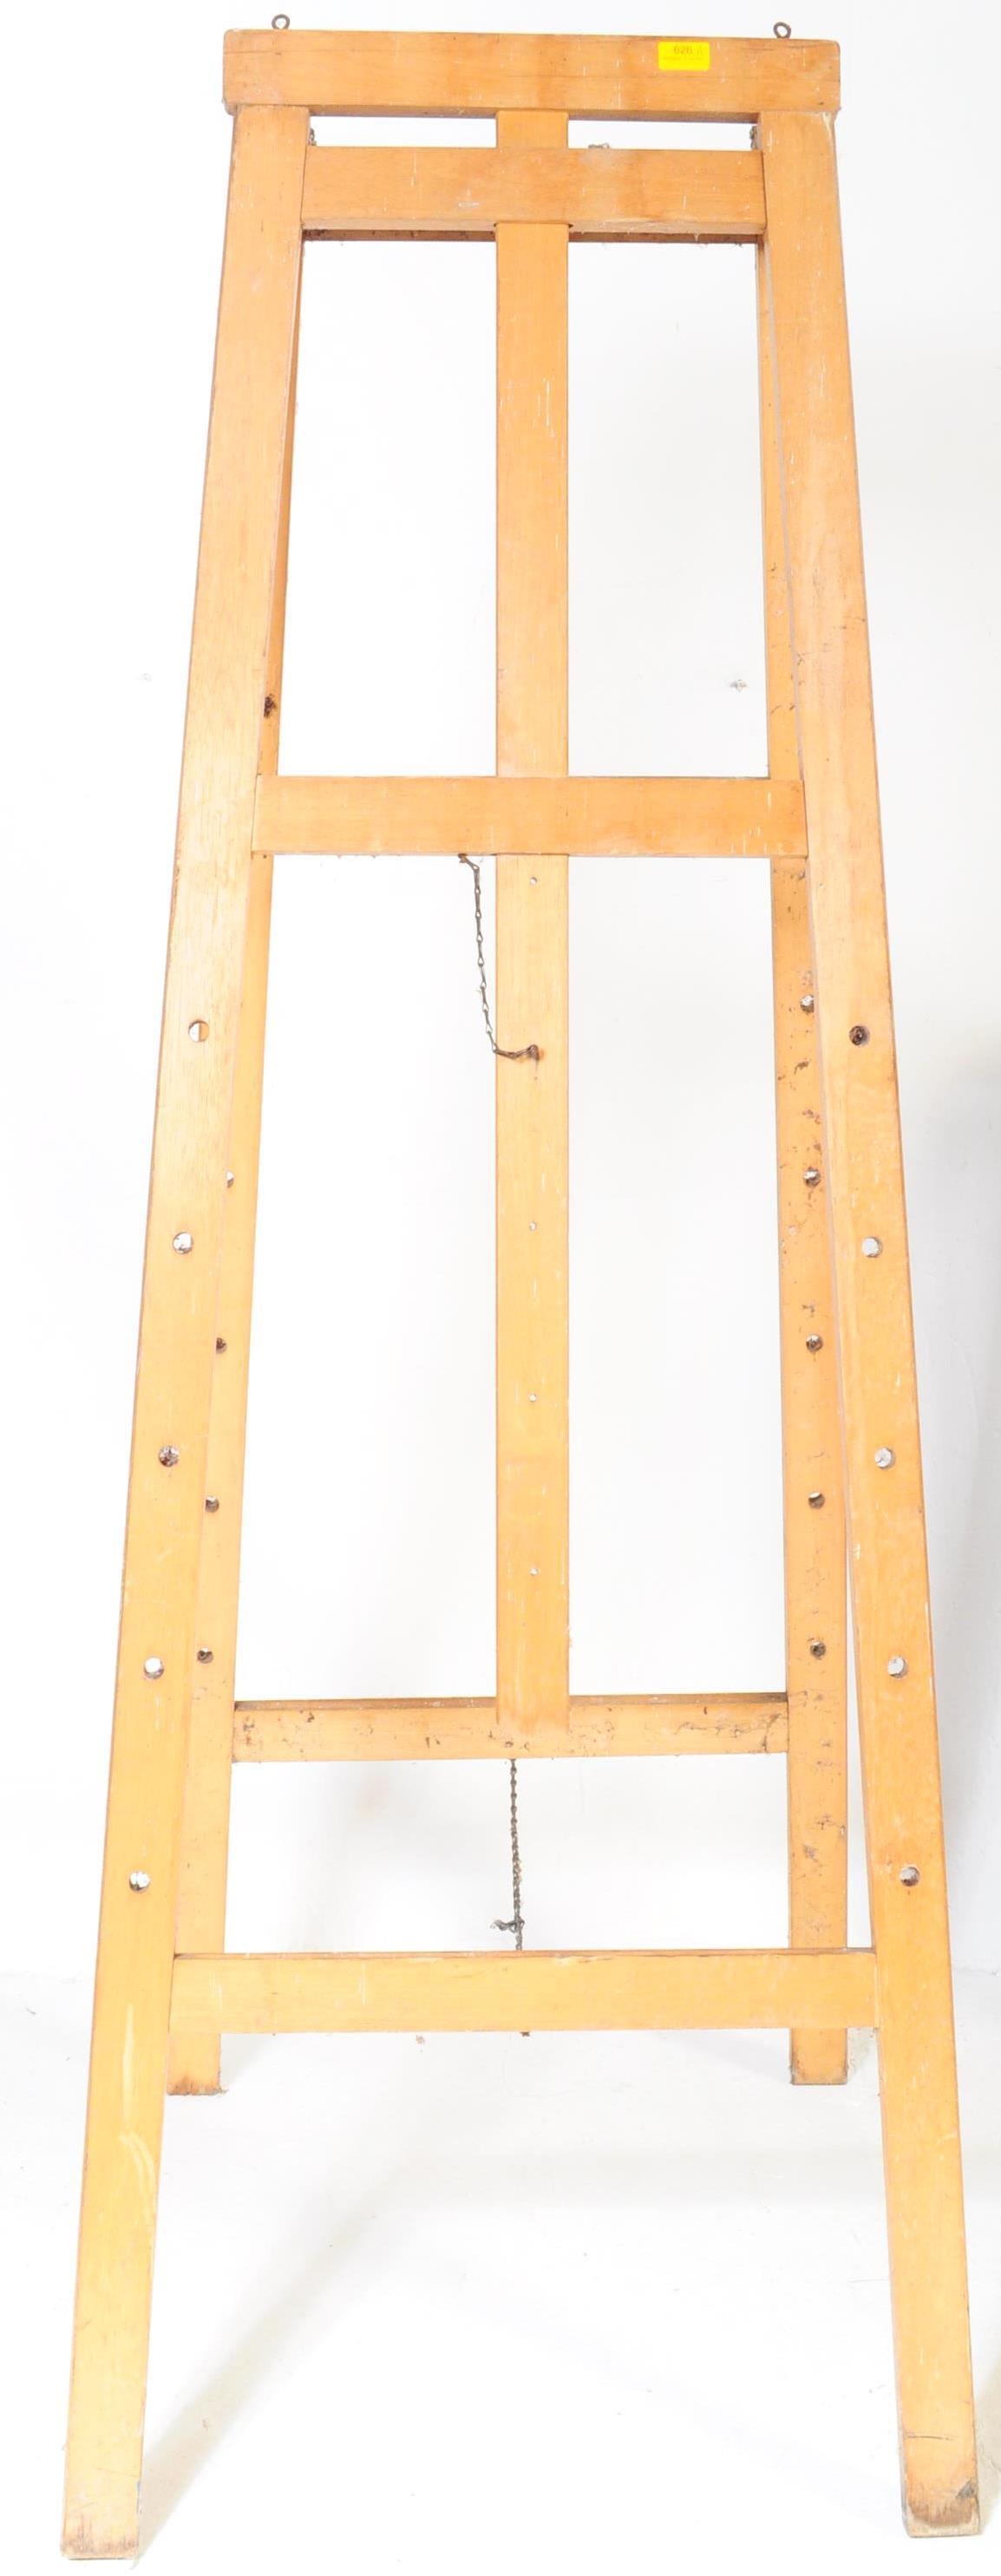 A LARGE VINTAGE RETRO 1970'S BEECH WOOD ARTIST EASEL - Image 2 of 5